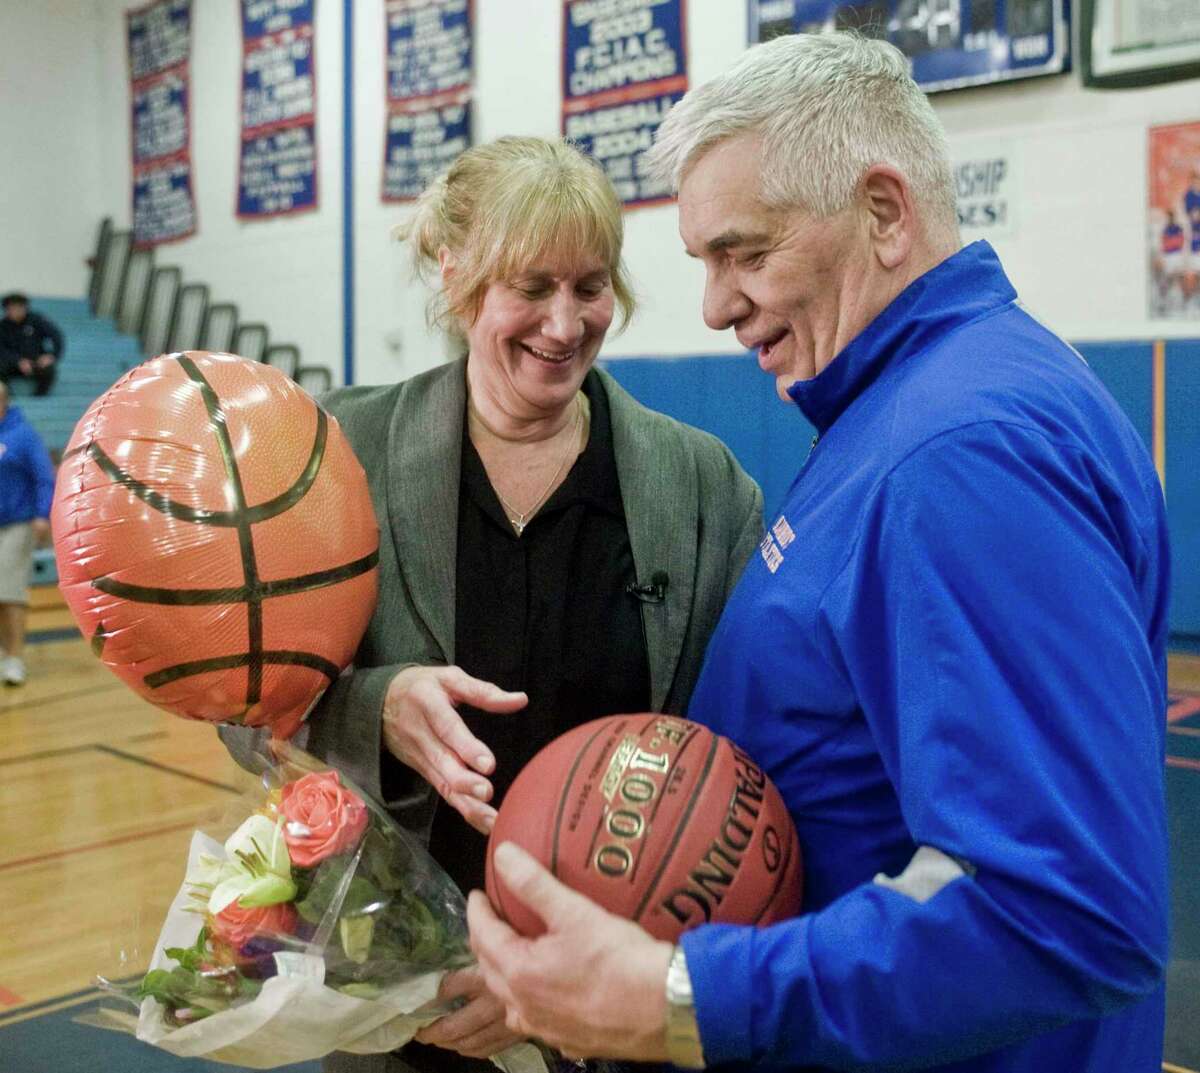 Danbury High School girls basketball coach Jackie DiNardo is presented the game ball by Athletic Director Chip Salvestrini after her 500th victory in a game against Bridgeport Central played at Danbury on Feb. 5.